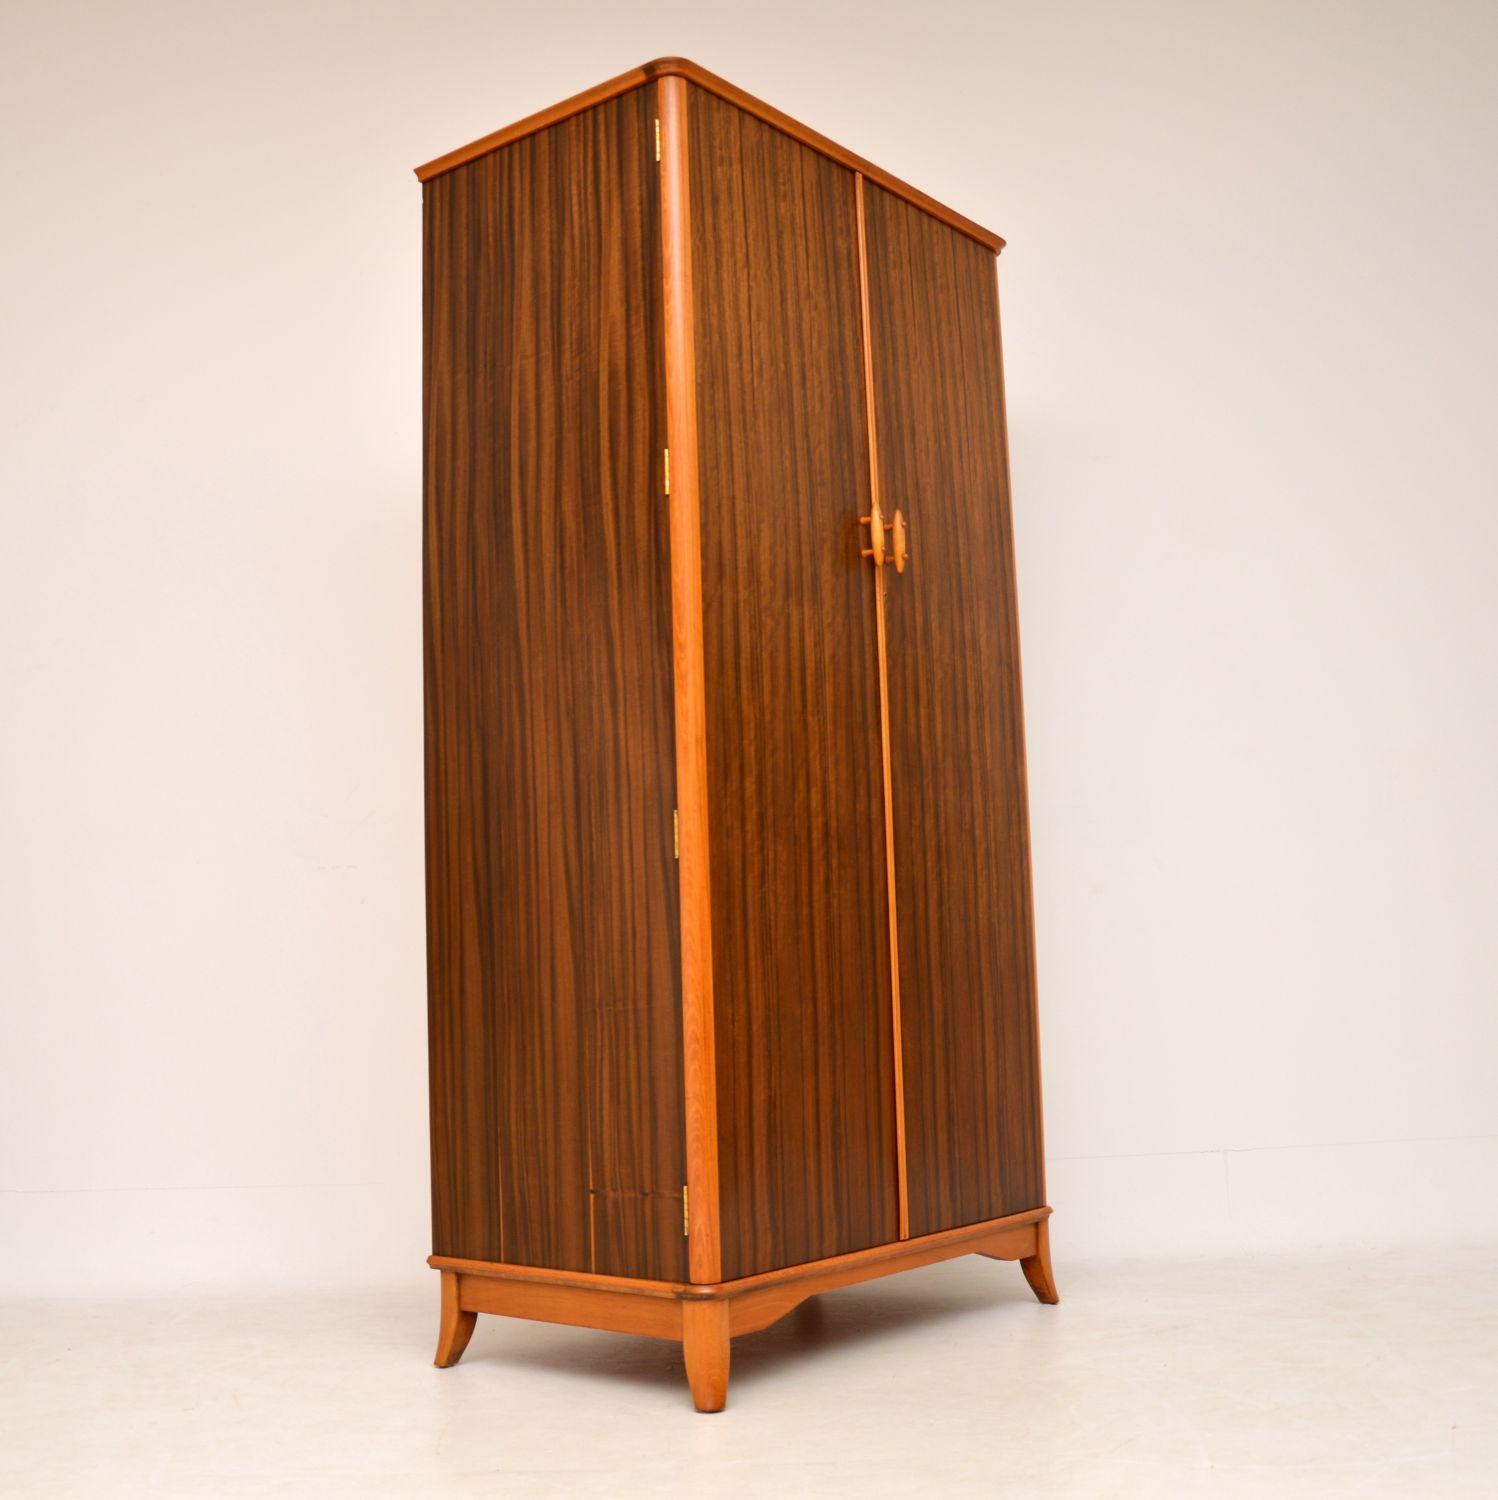 A stunning vintage wardrobe in walnut and contrasting beech, this was made by Vesper furniture in England during the 1950s-1960s. It is of amazing quality, with lots of nice features. The walnut has a beautiful color and grain patterns, the handles